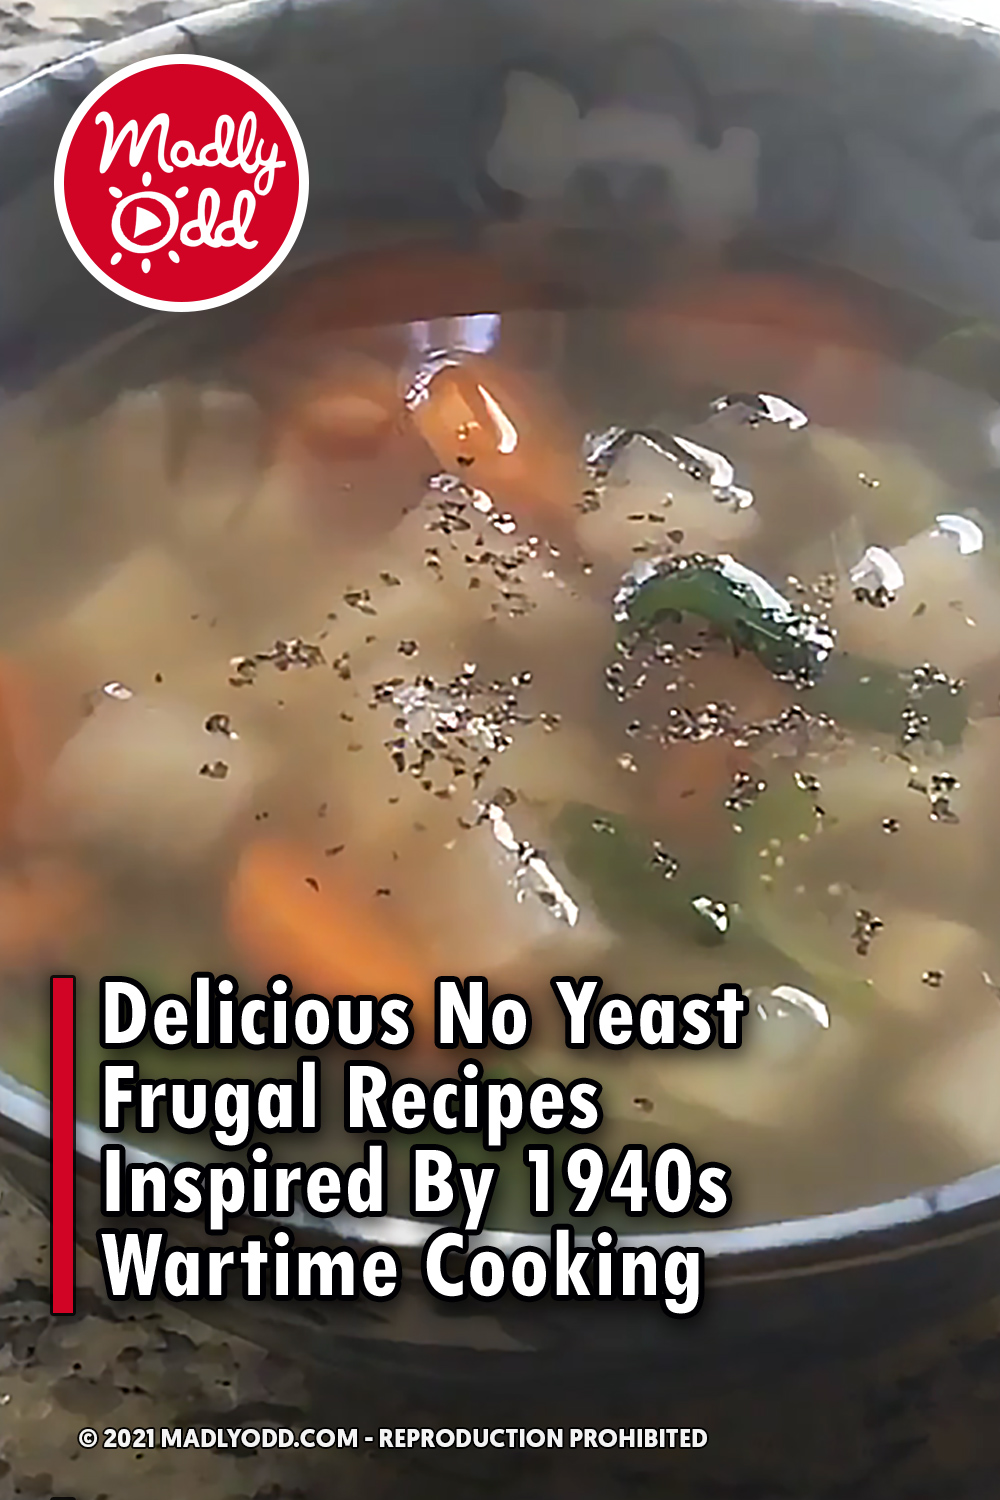 Delicious No Yeast Frugal Recipes Inspired By 1940s Wartime Cooking